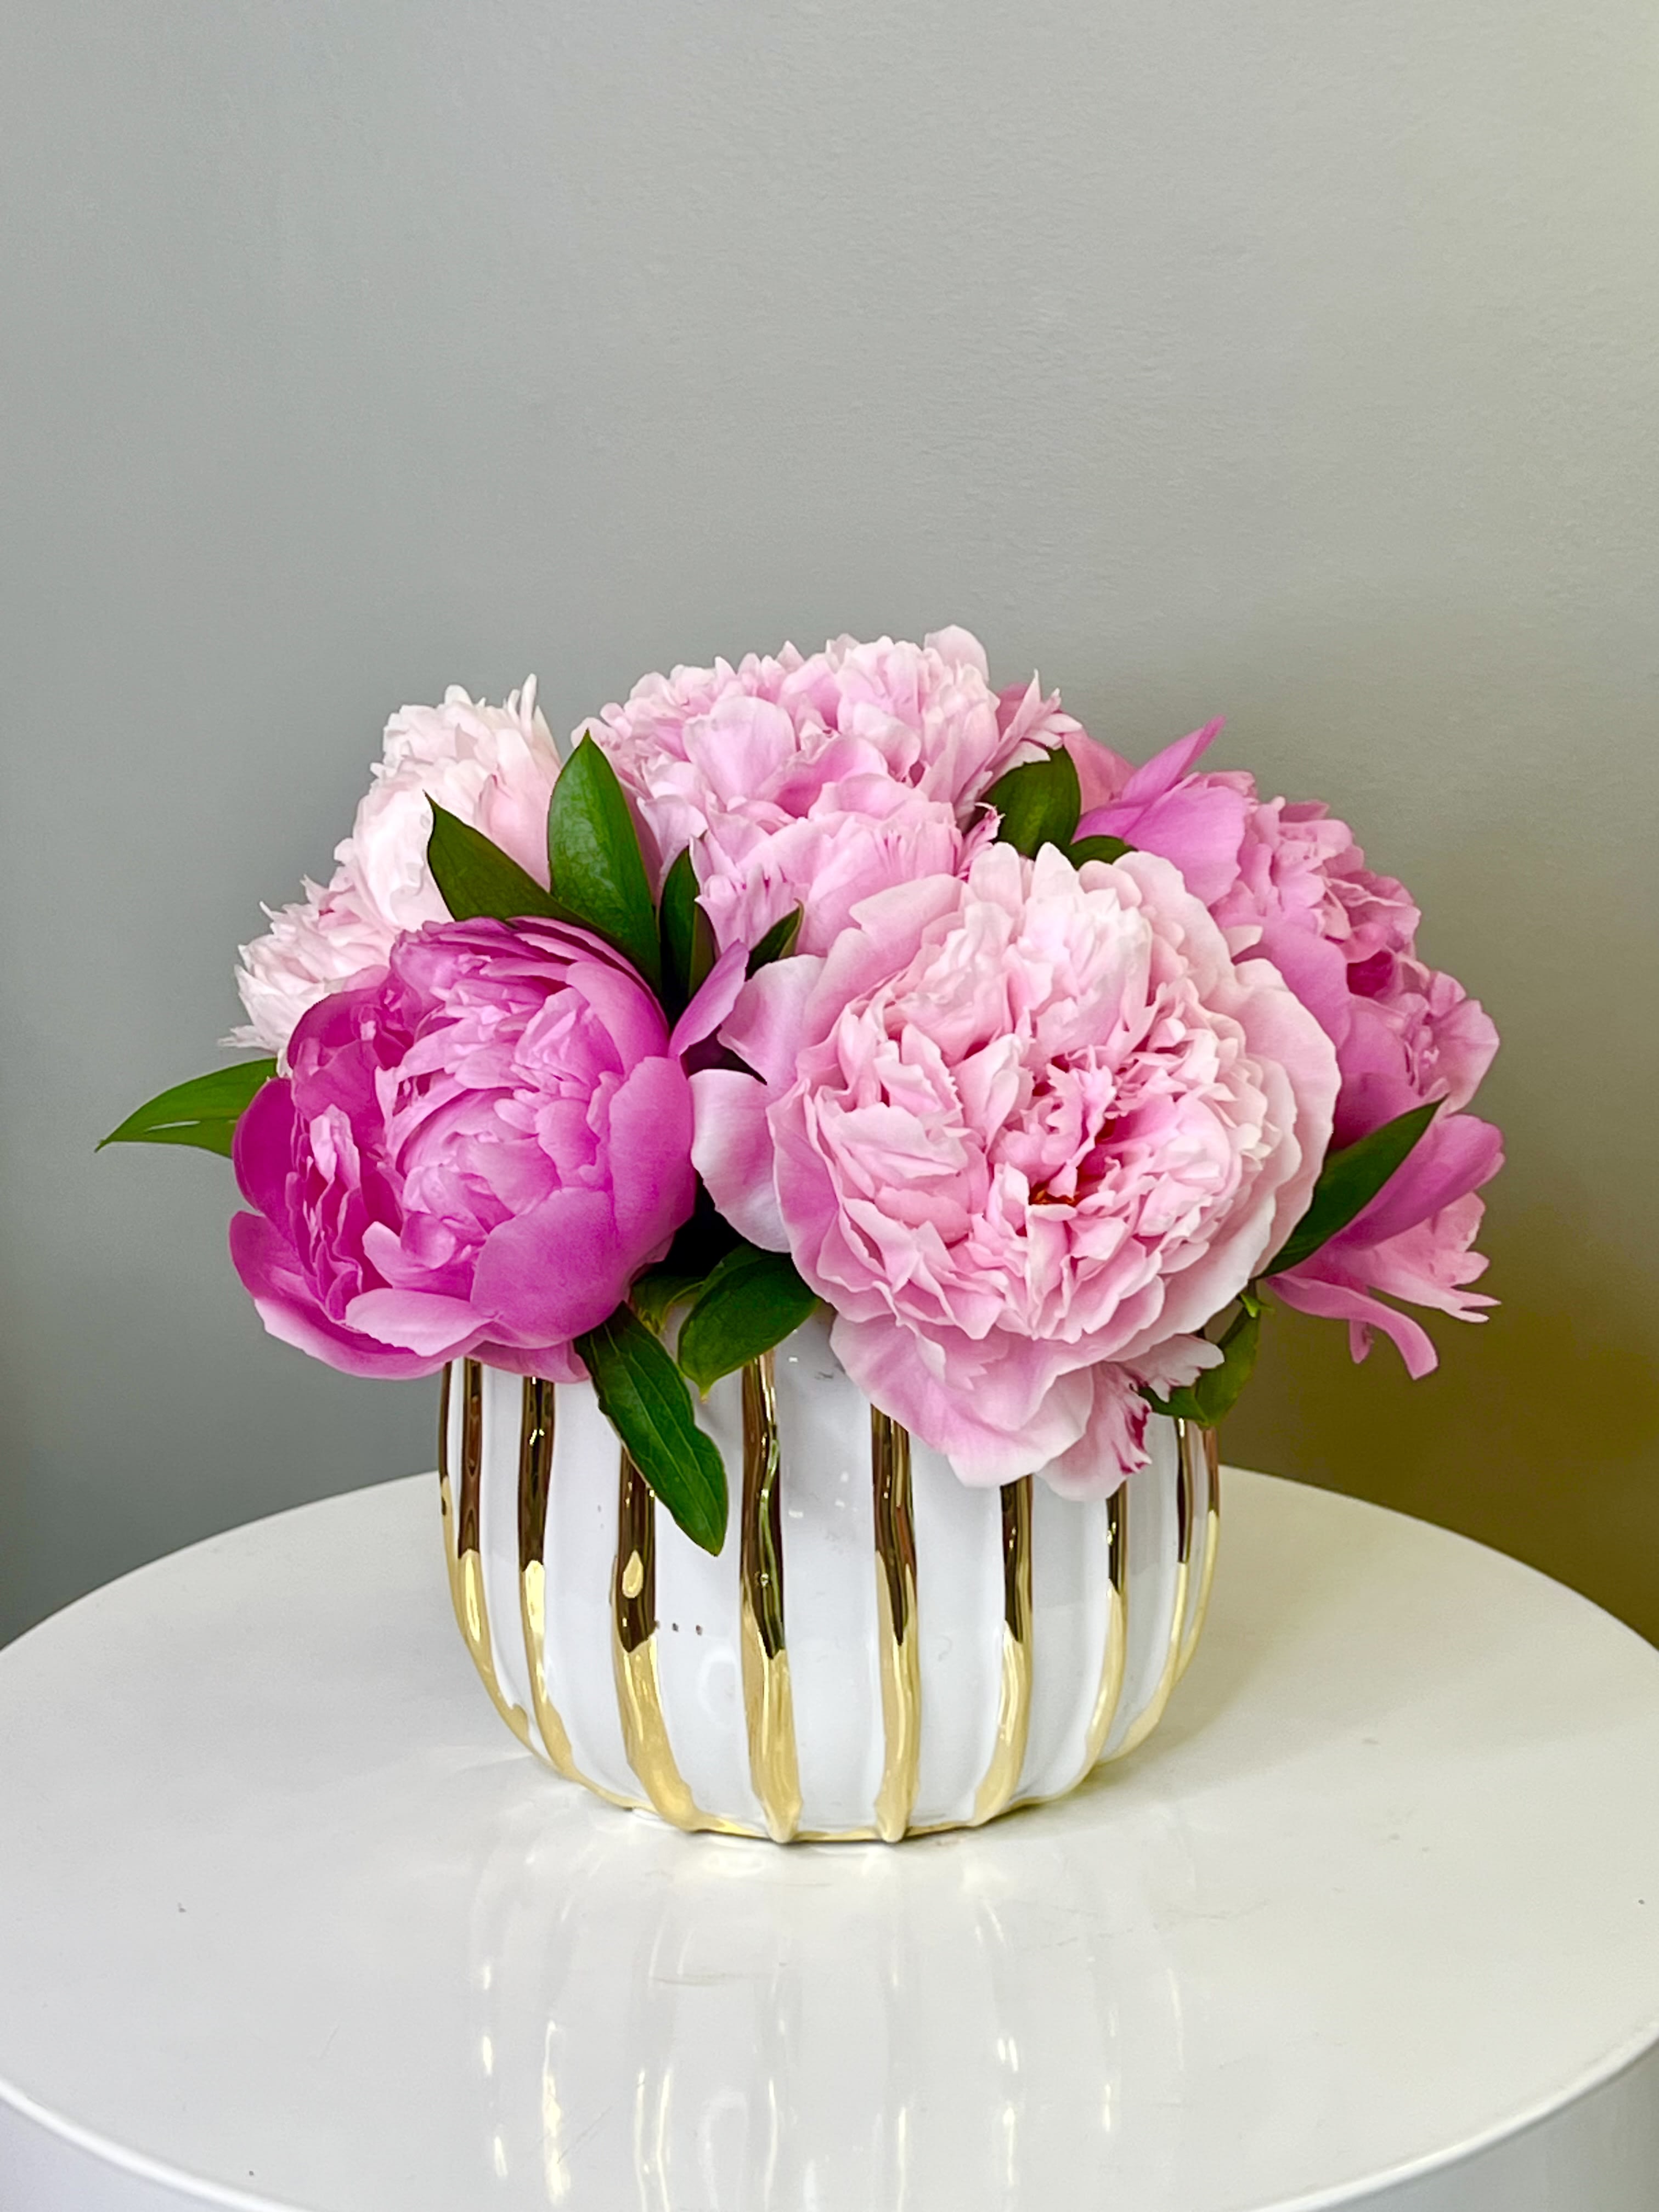 Peonies Dream - Arrangement of seven large head Peonies flowers with a delicate touch of greenery in an elegant ceramic vase